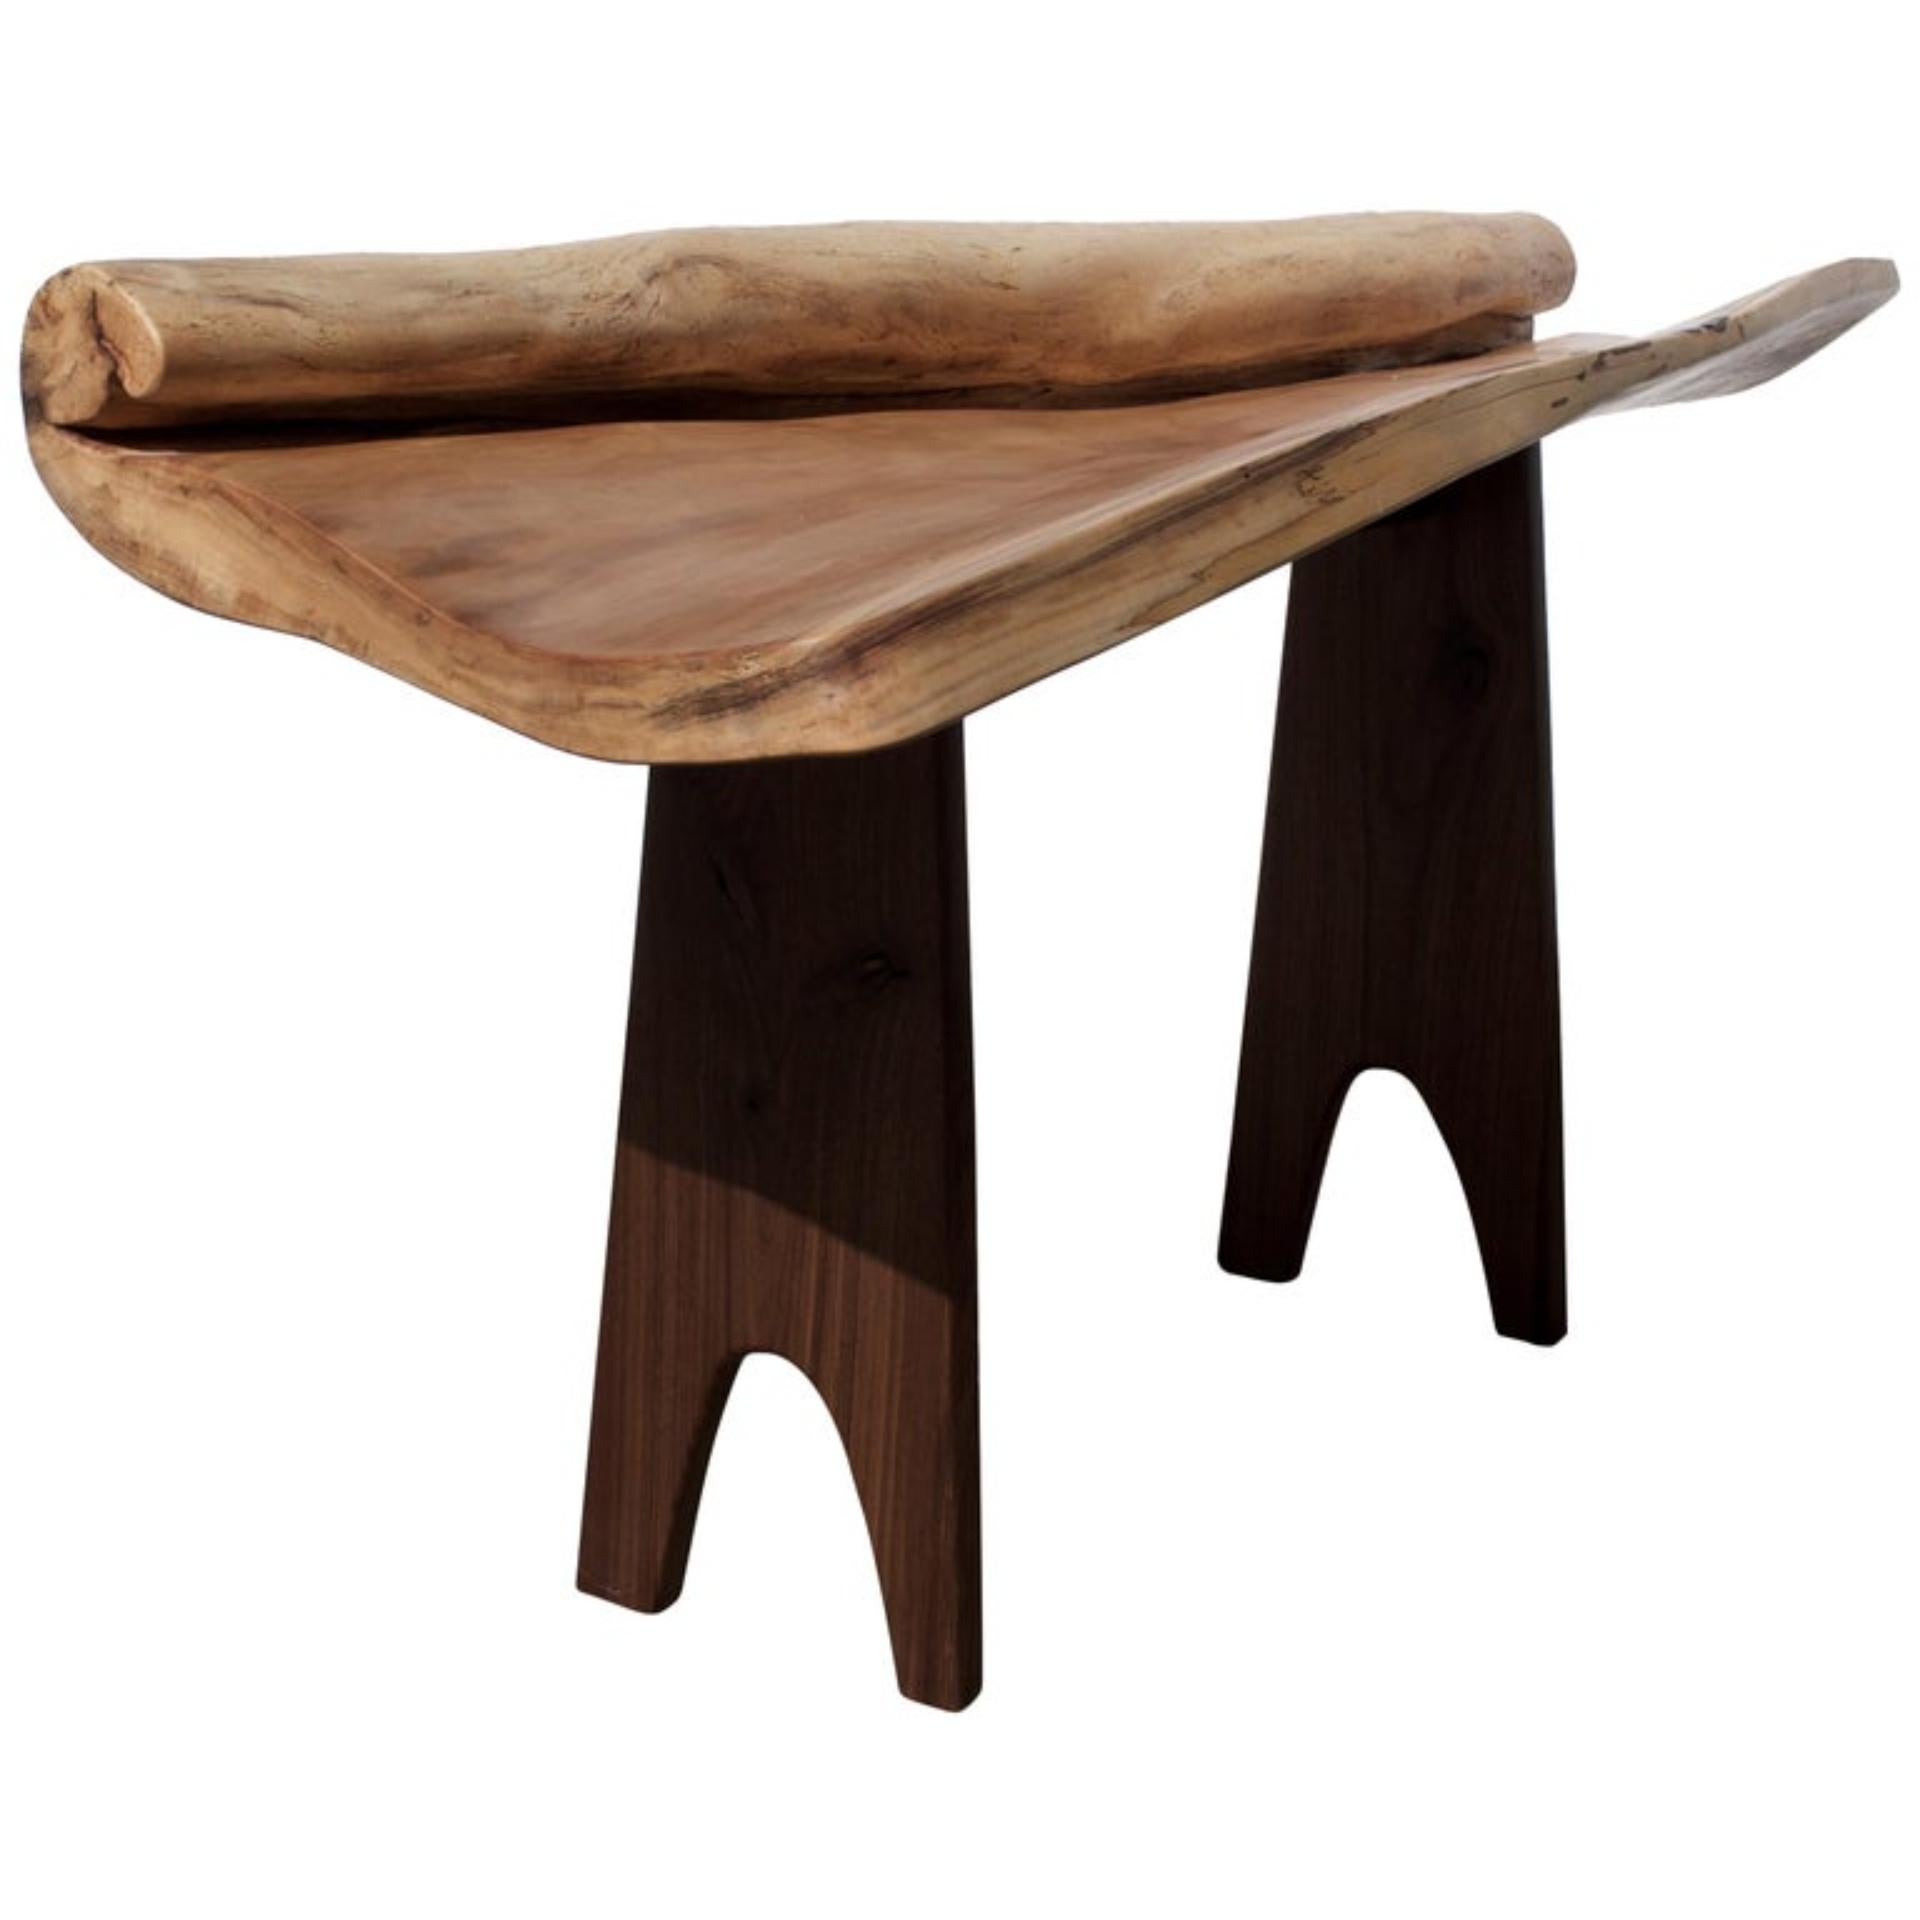 Unique signed console by Jörg Pietschmann
Materials: Poplar, Europe walnut
Measures: H 93 x W 174 x D 60 cm
Polished oil finish


In Pietschmann’s sculptures, trees that for centuries were part of a landscape and founded in primordial forces